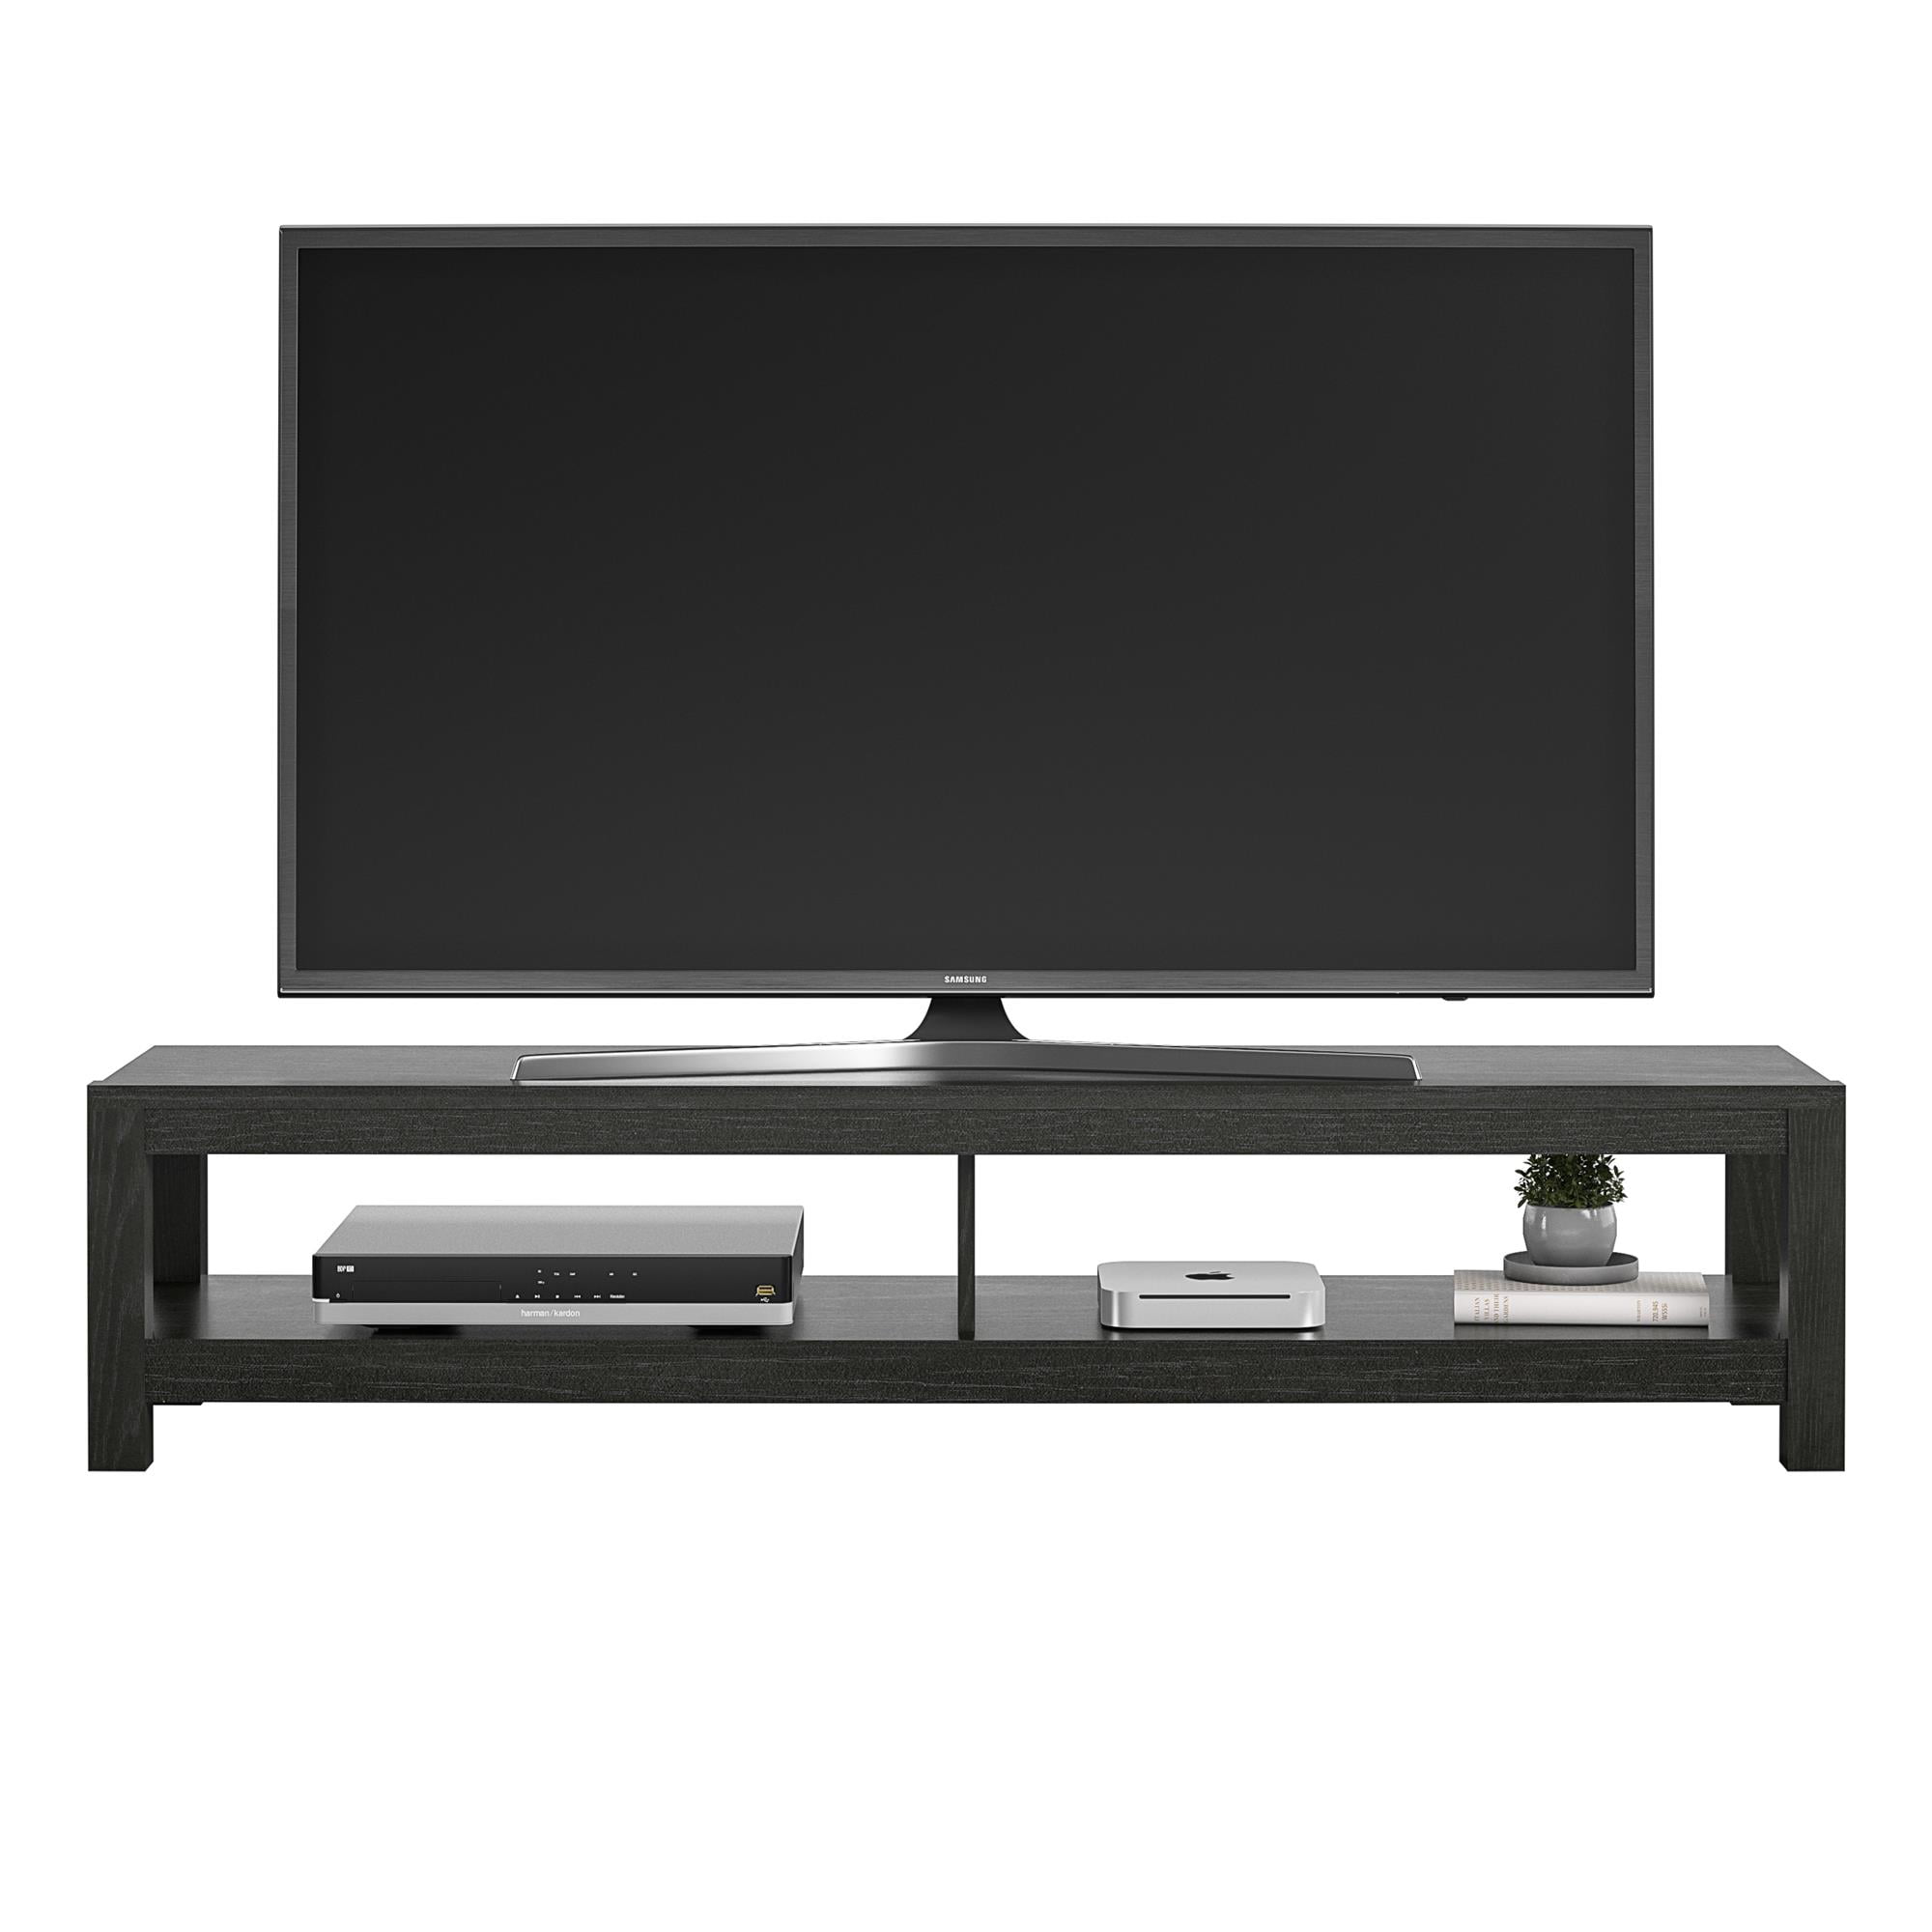 Mainstays Tv Stand For S Up To, Mainstays 55 Tv Stand With Sliding Glass Doors